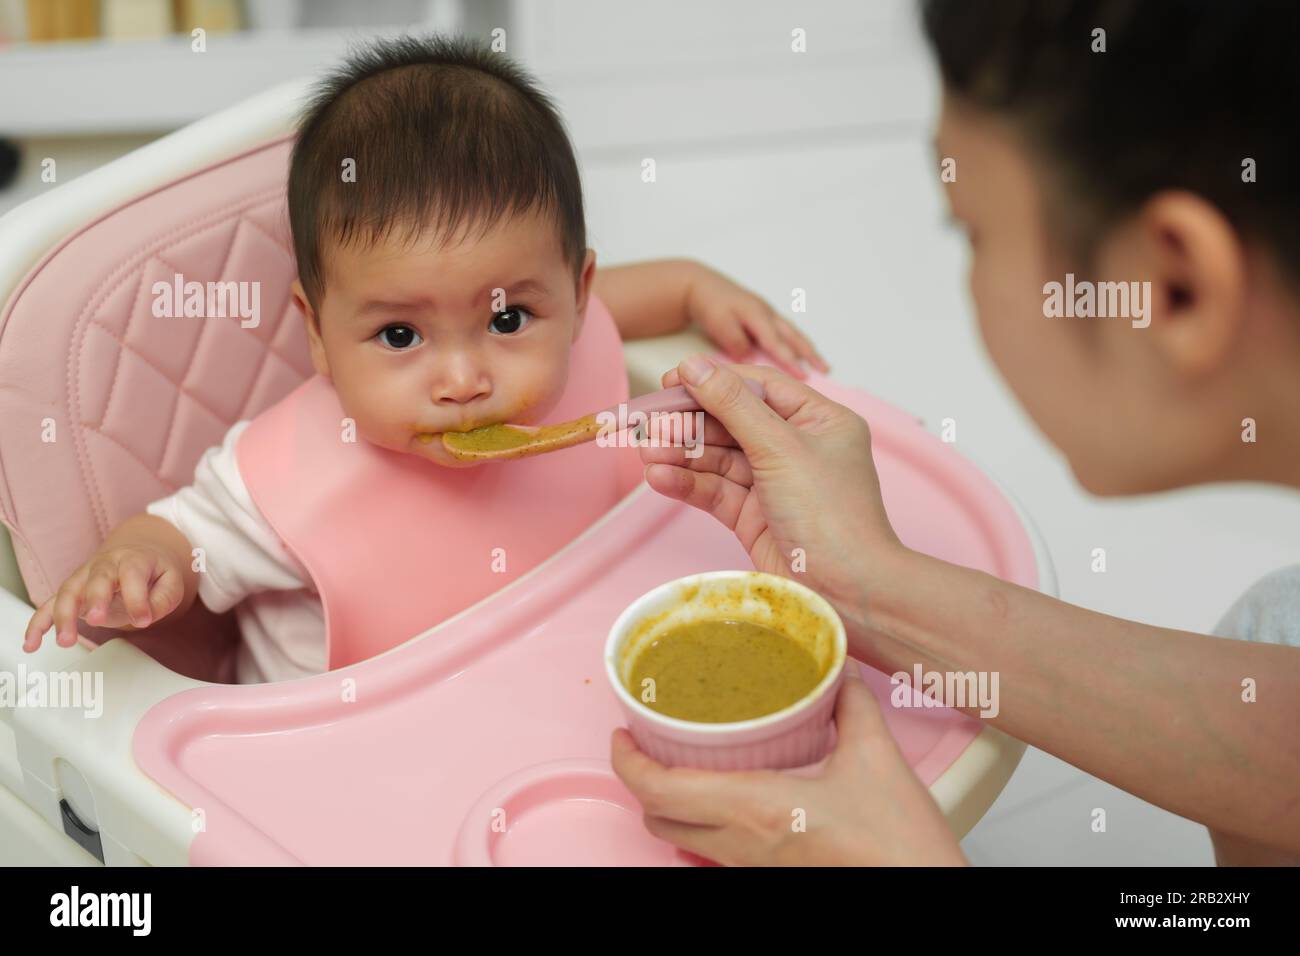 mother feeding food to her infant baby eating with a spoon at home Stock Photo